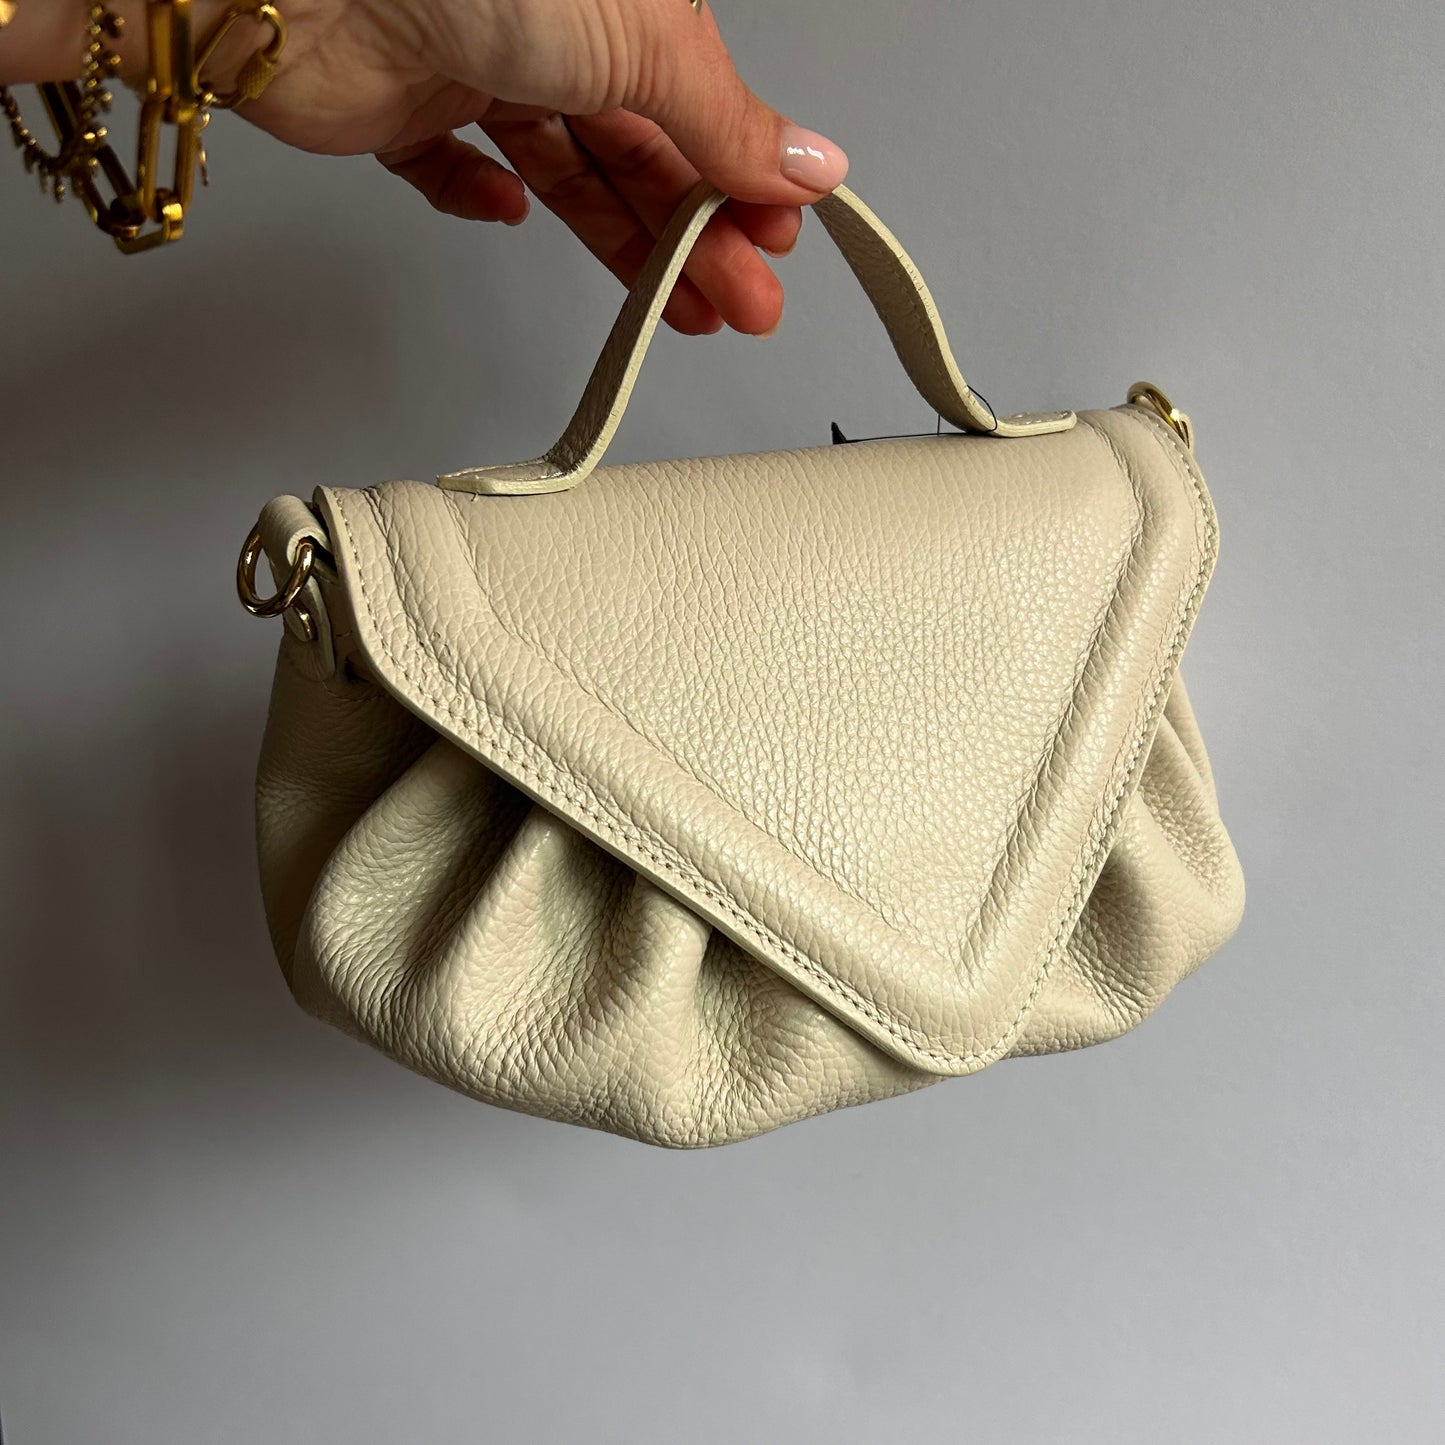 The Pleated Cross-Body Leather Clutch